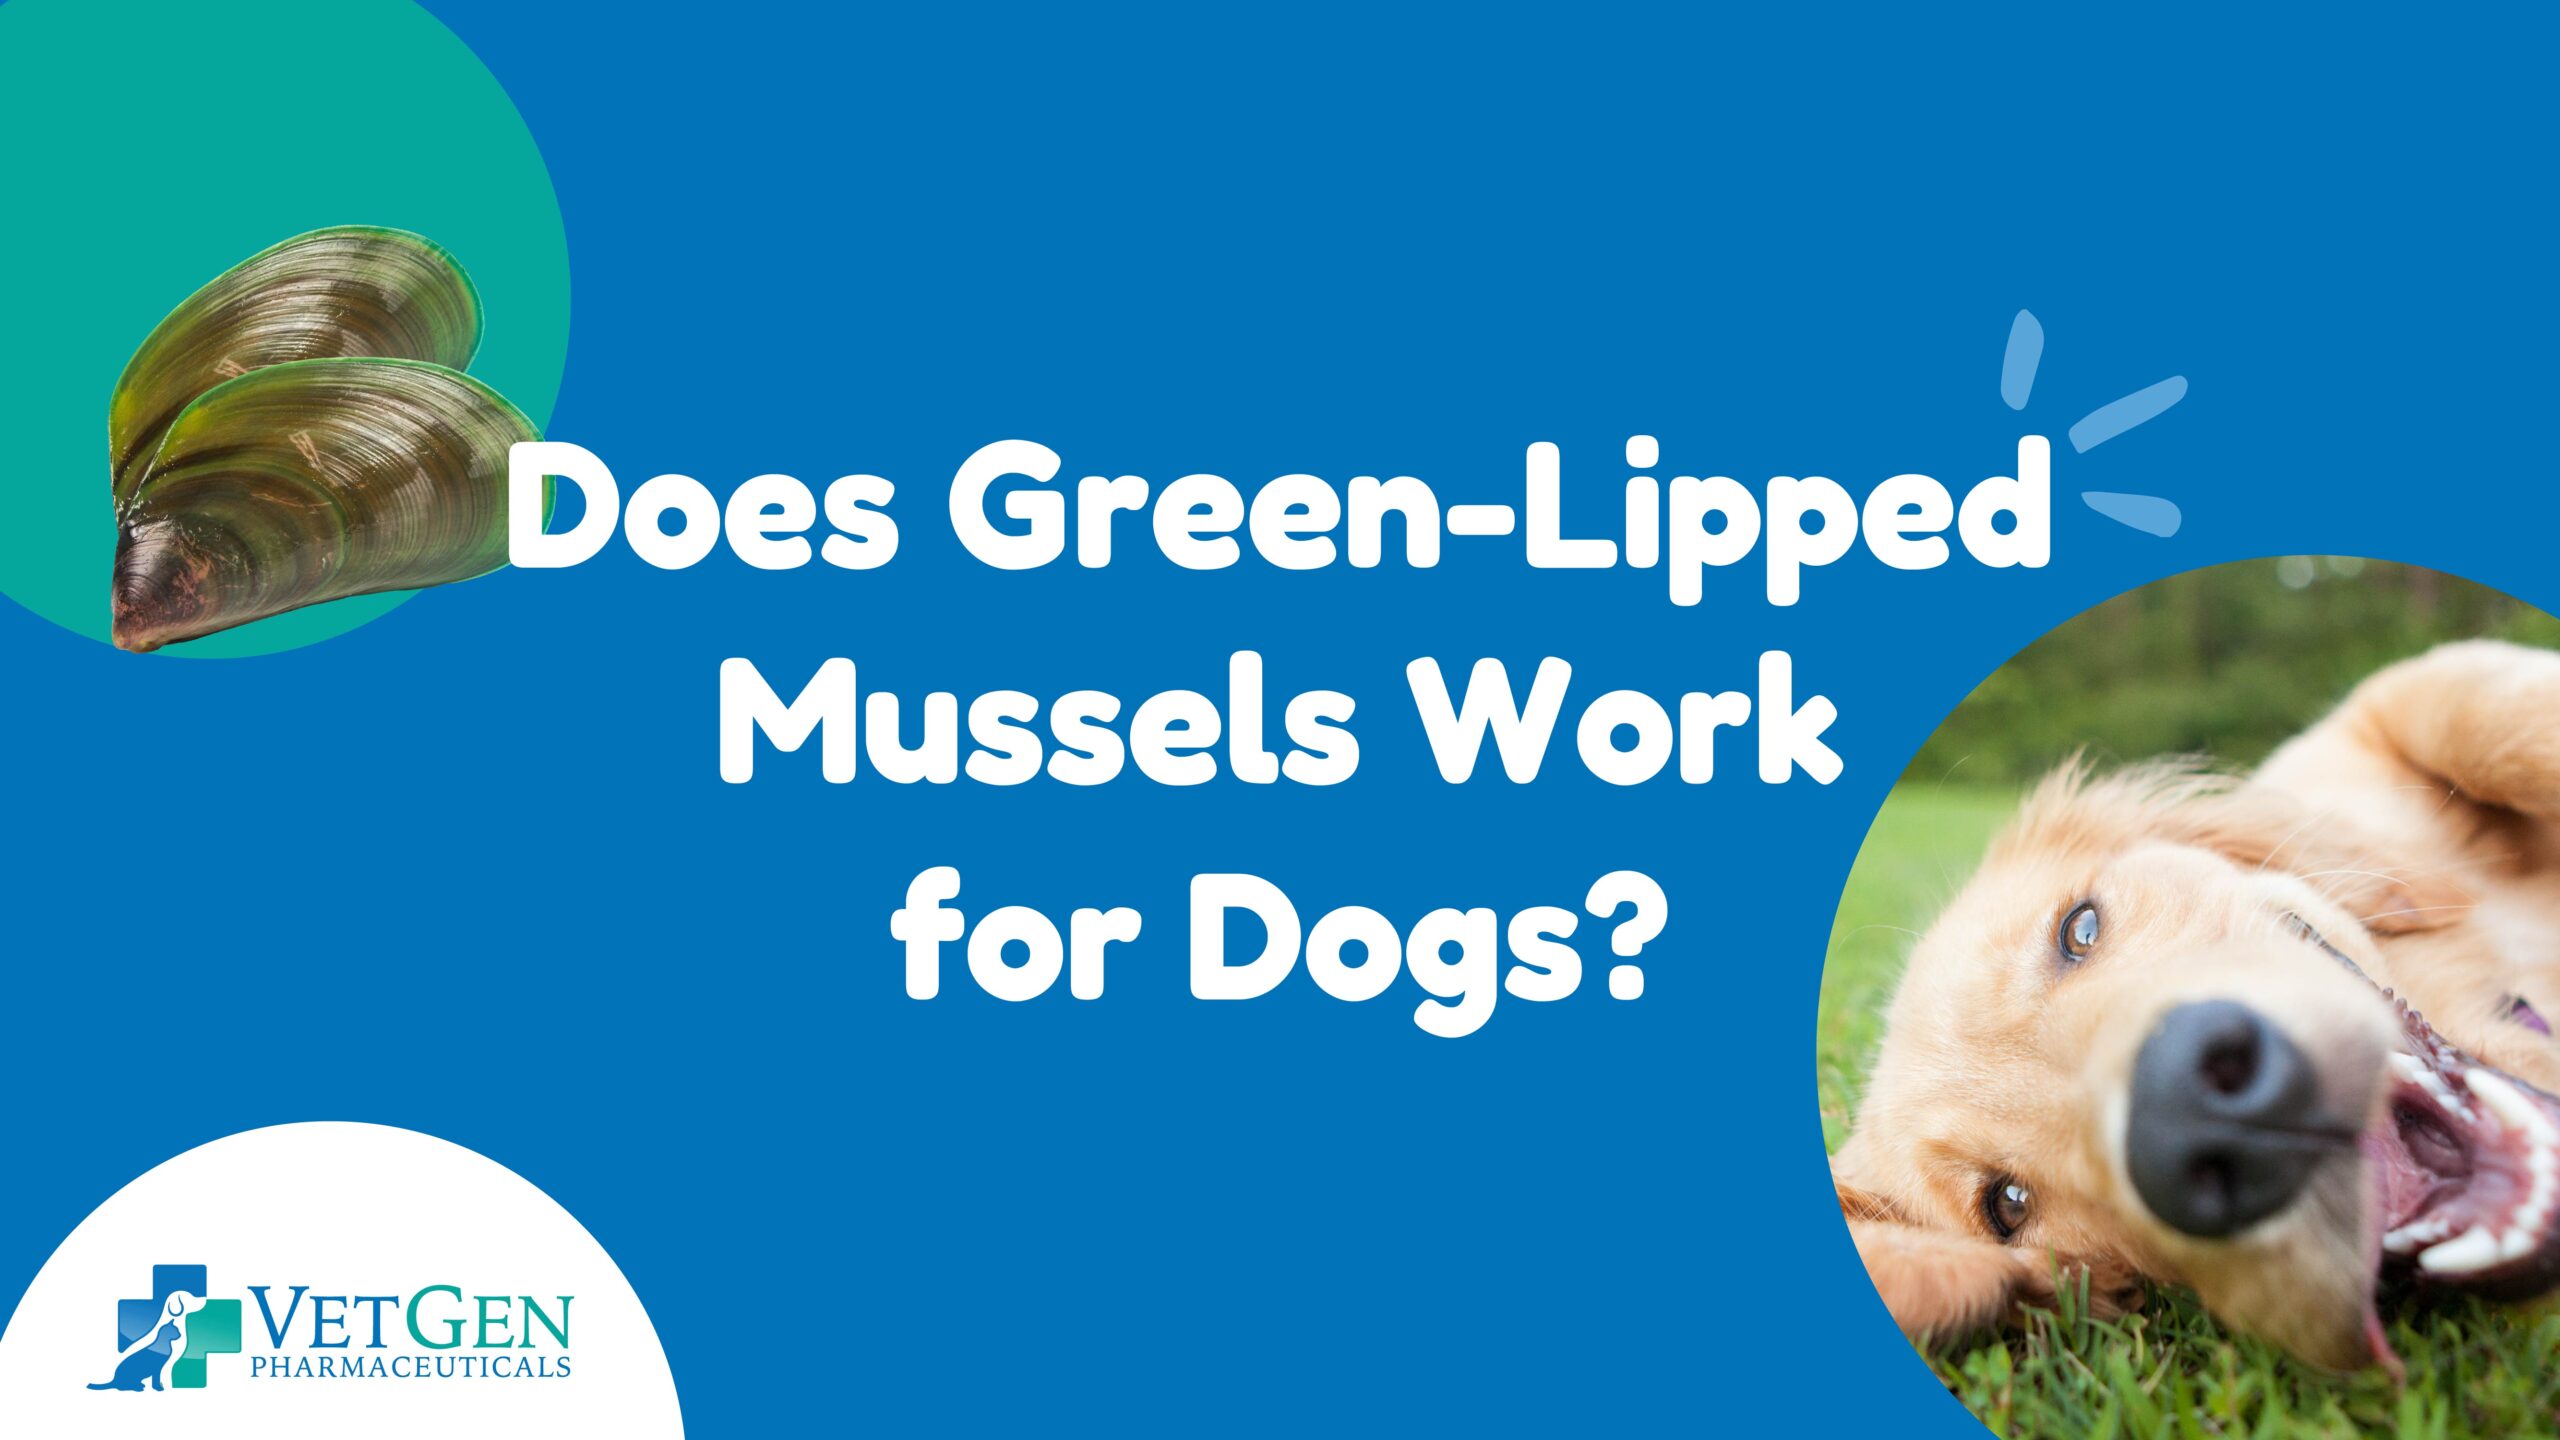 Does green-lipped mussel work for dogs